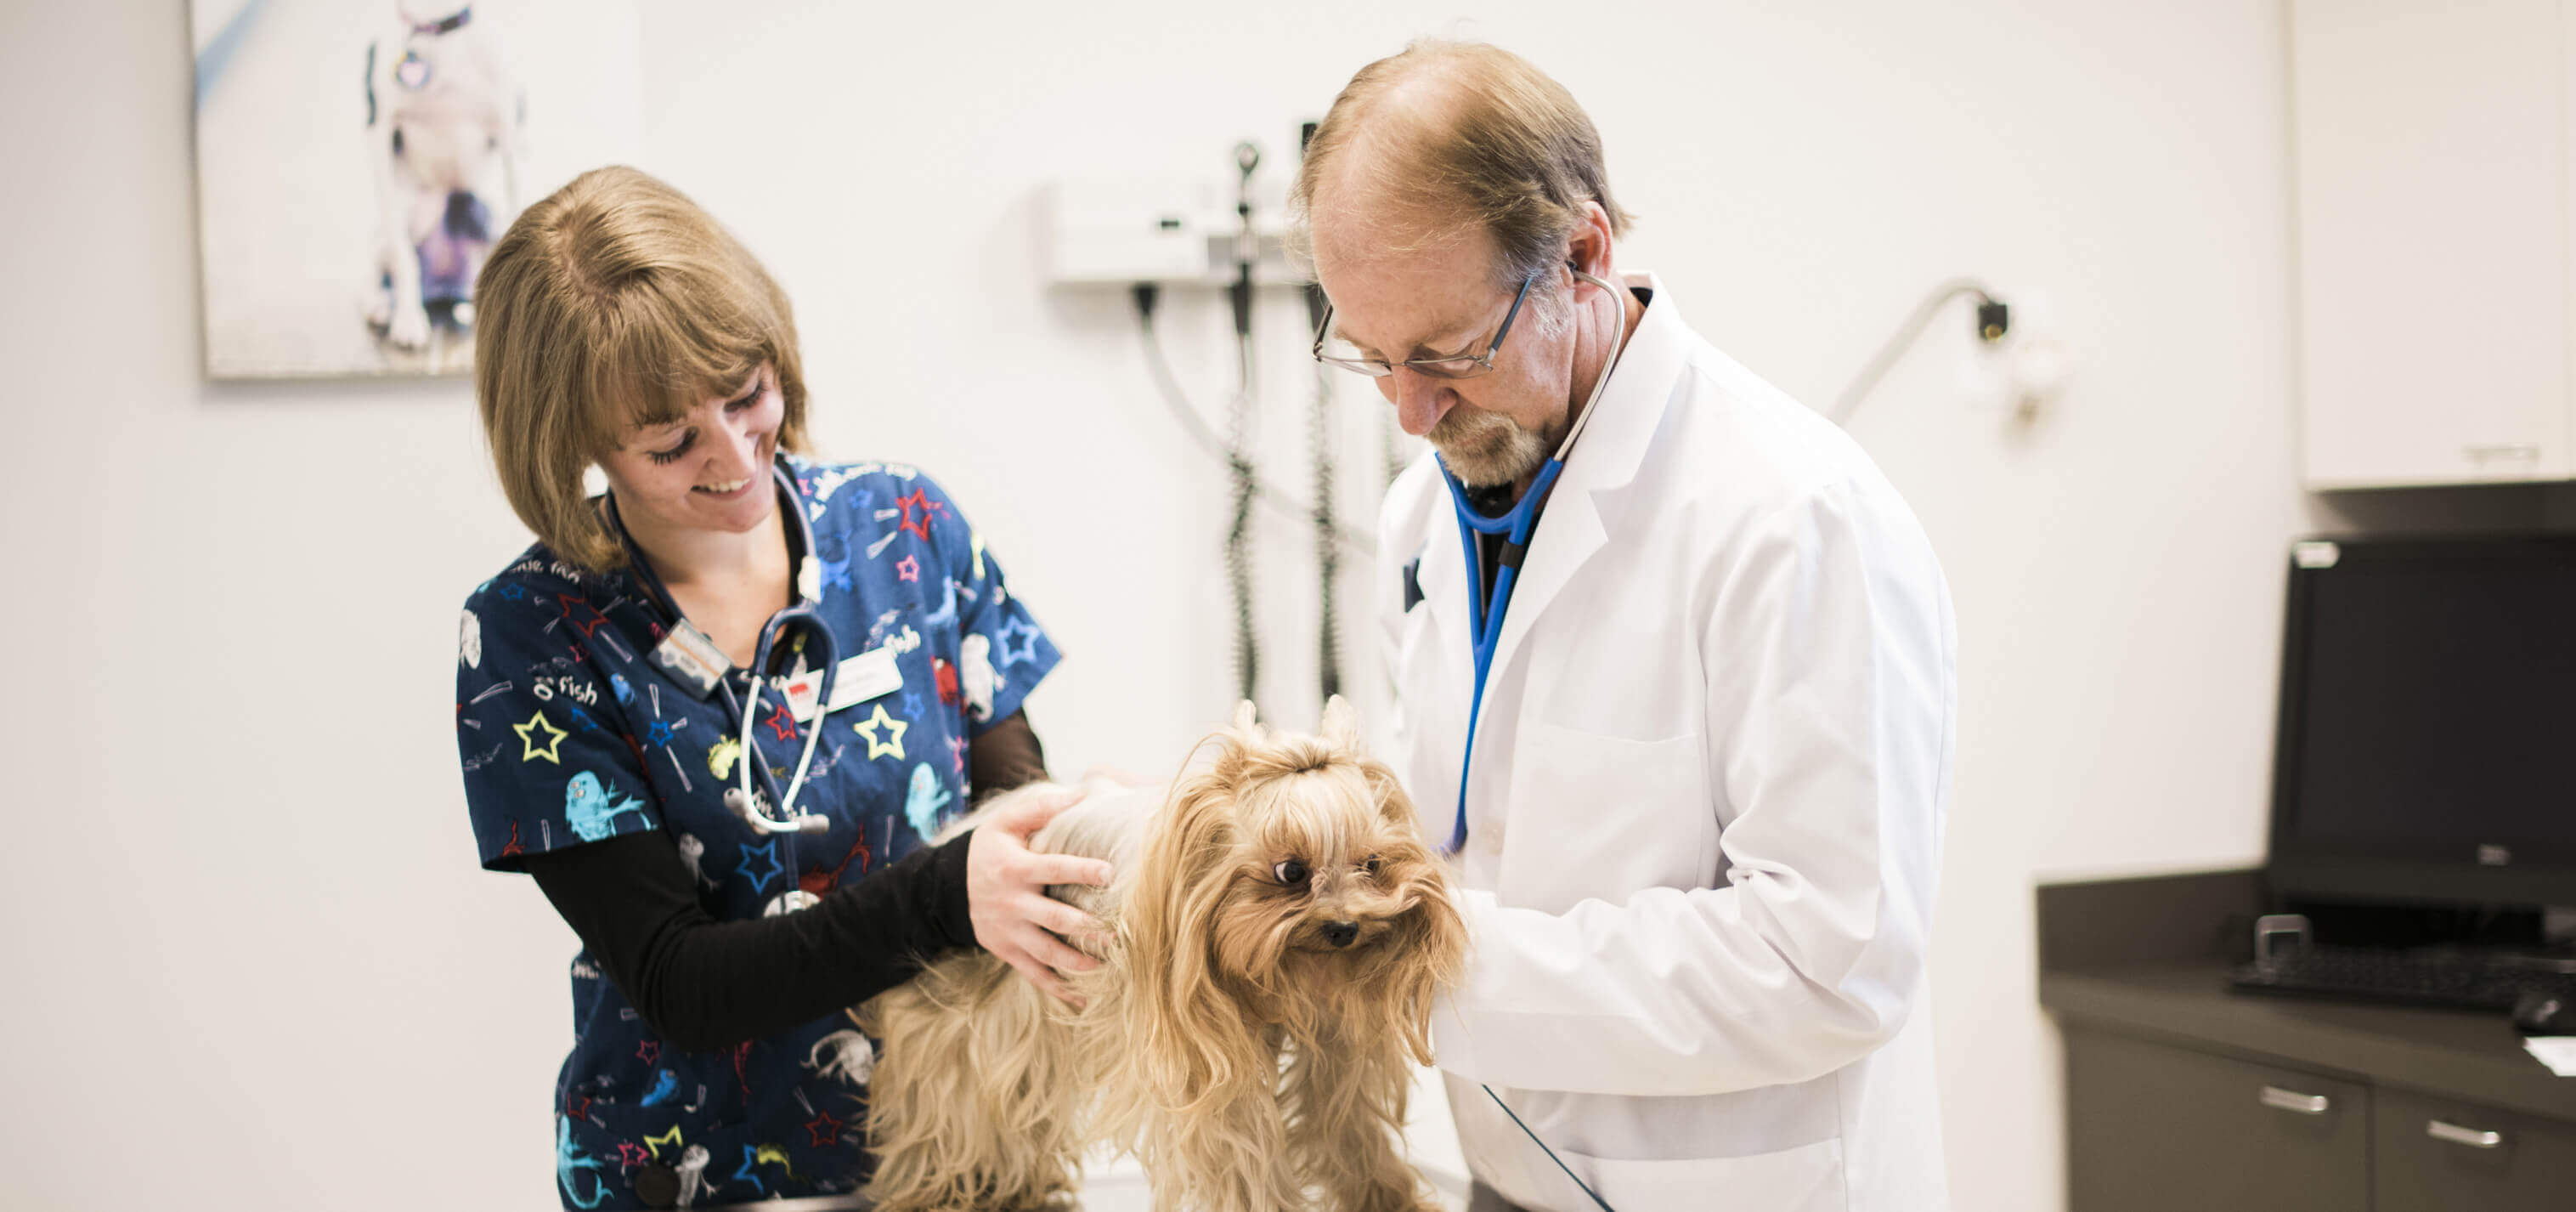 Seven Hills Veterinary Hospital | A practice based on caring